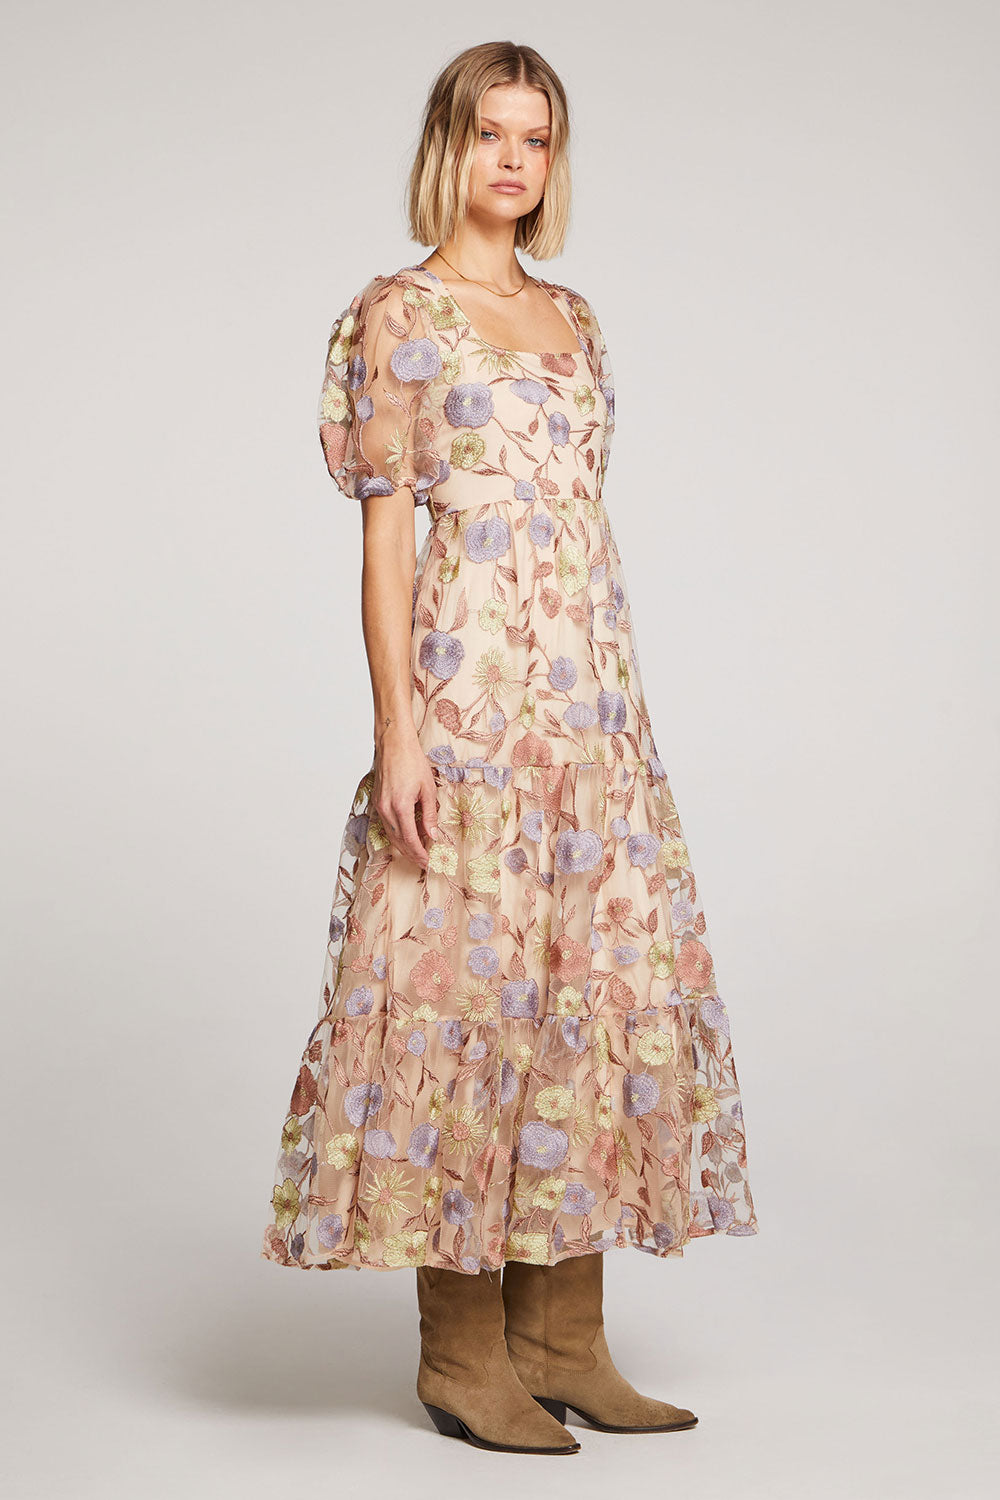 Indra Maxi Dress - Saltwater Luxe